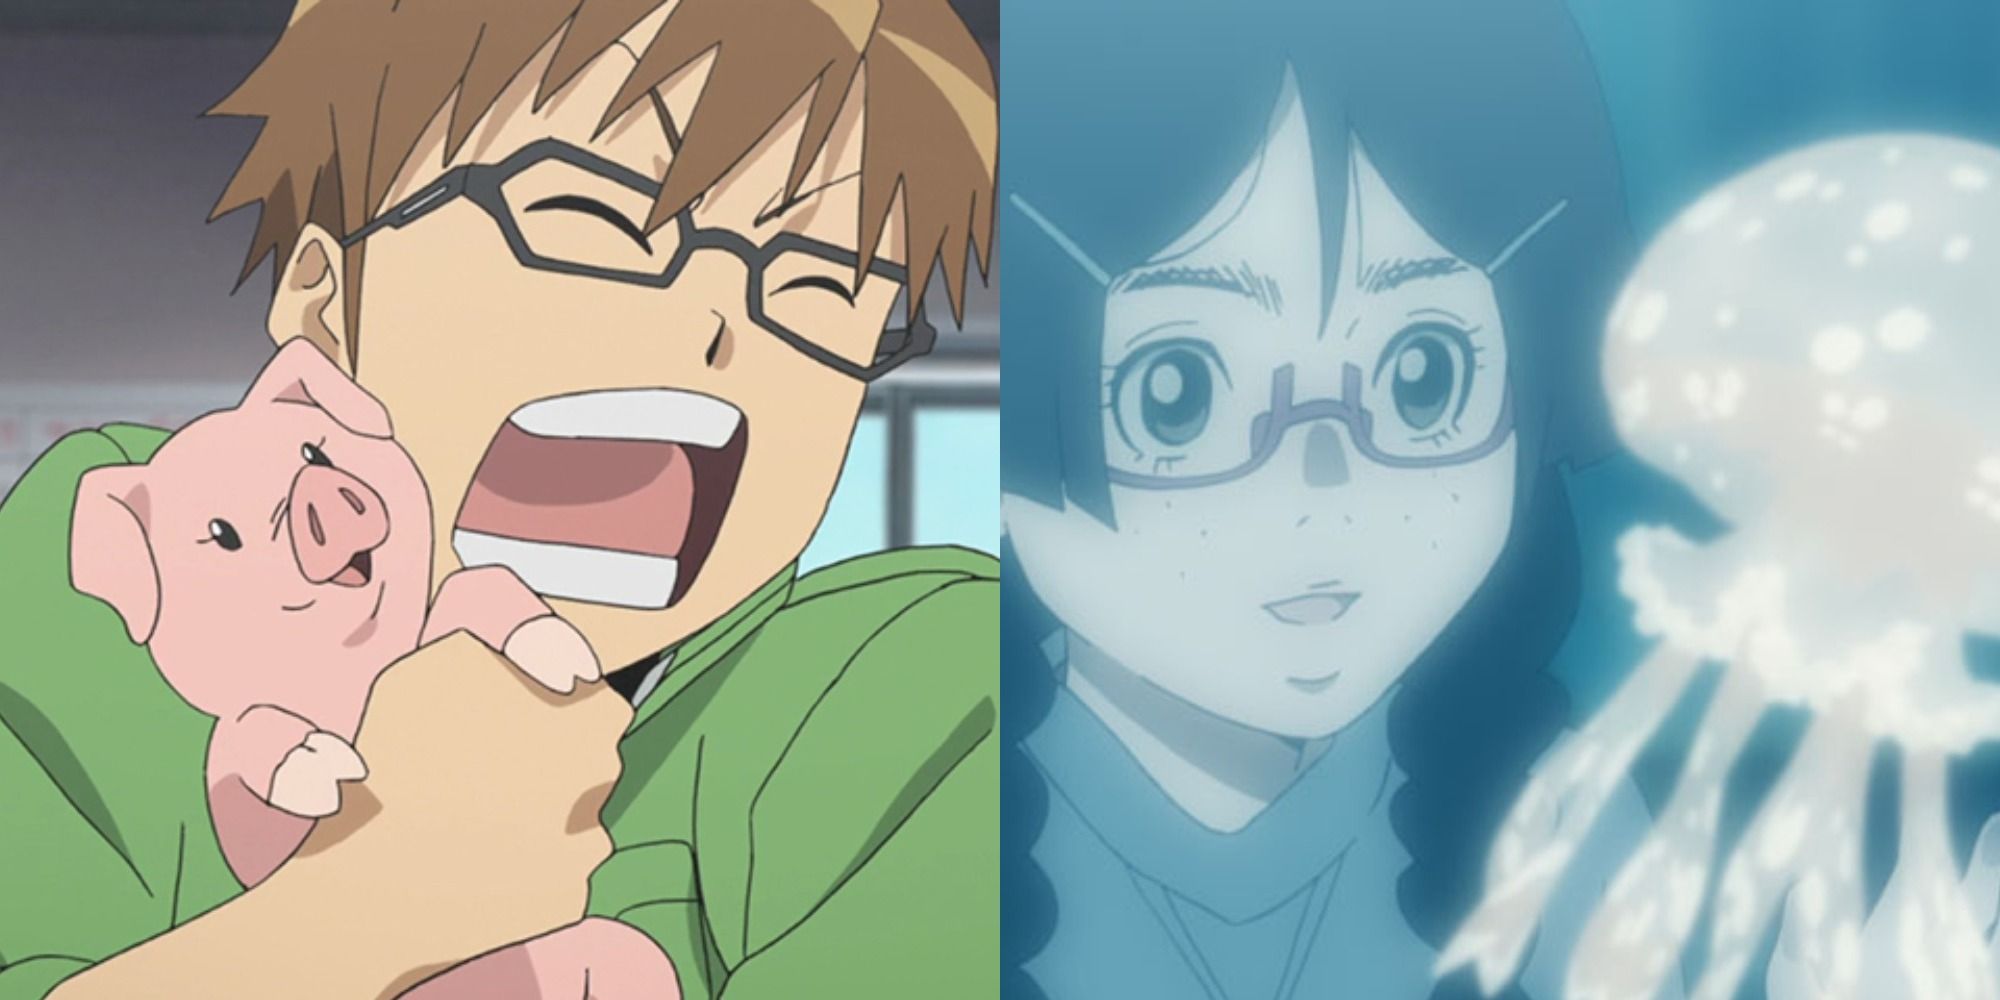 20 Best Aquarius Anime Characters Ranked by Likability